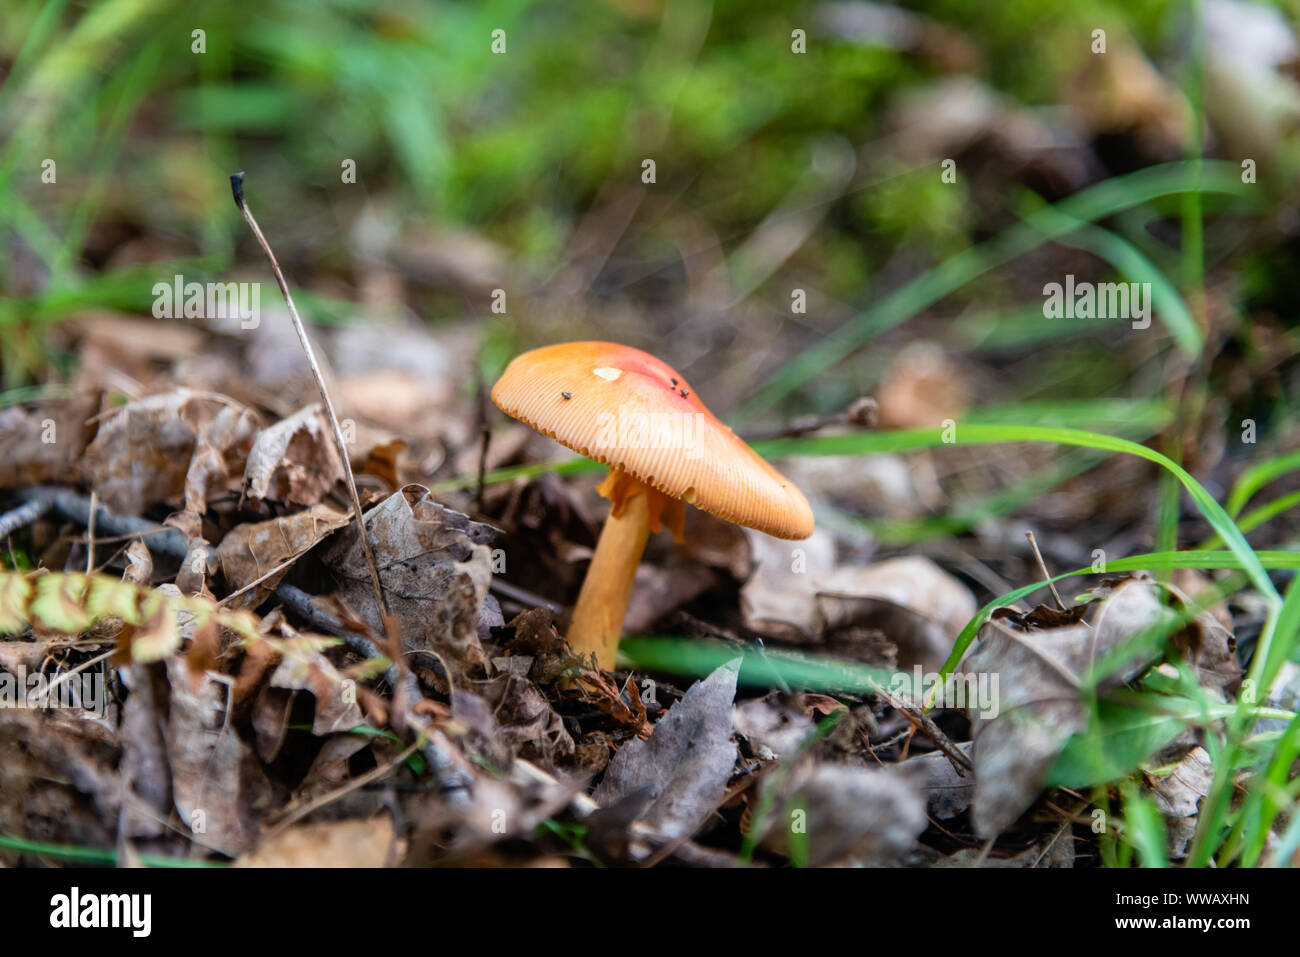 Poisonous mushrooms in the forest Stock Photo